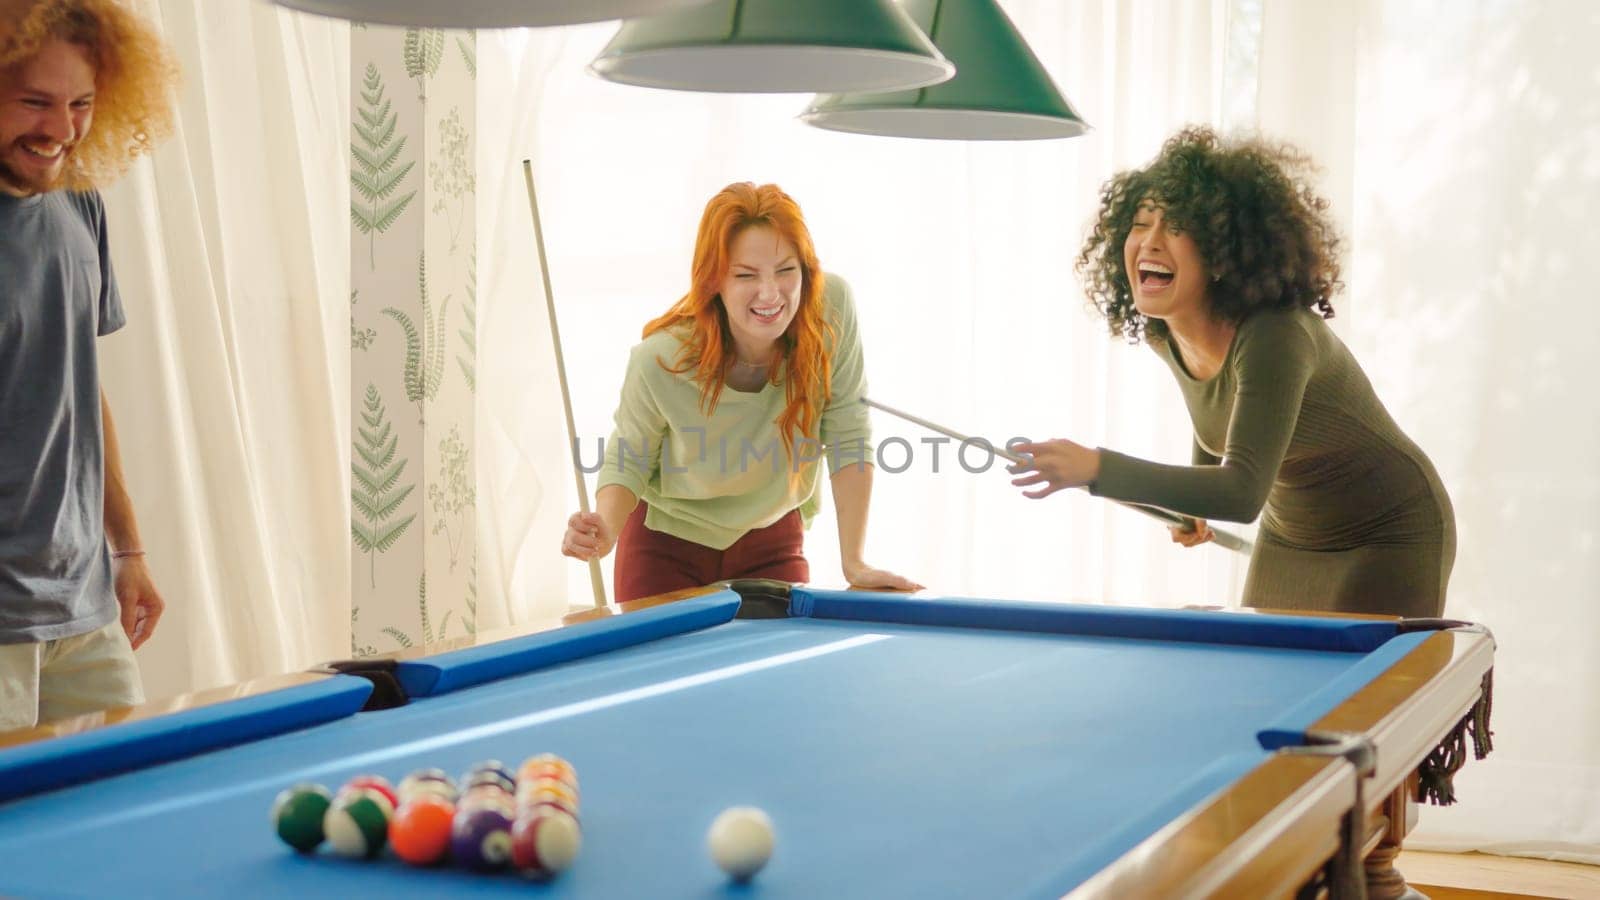 Friends laughing when woman playing awful at pool by ivanmoreno